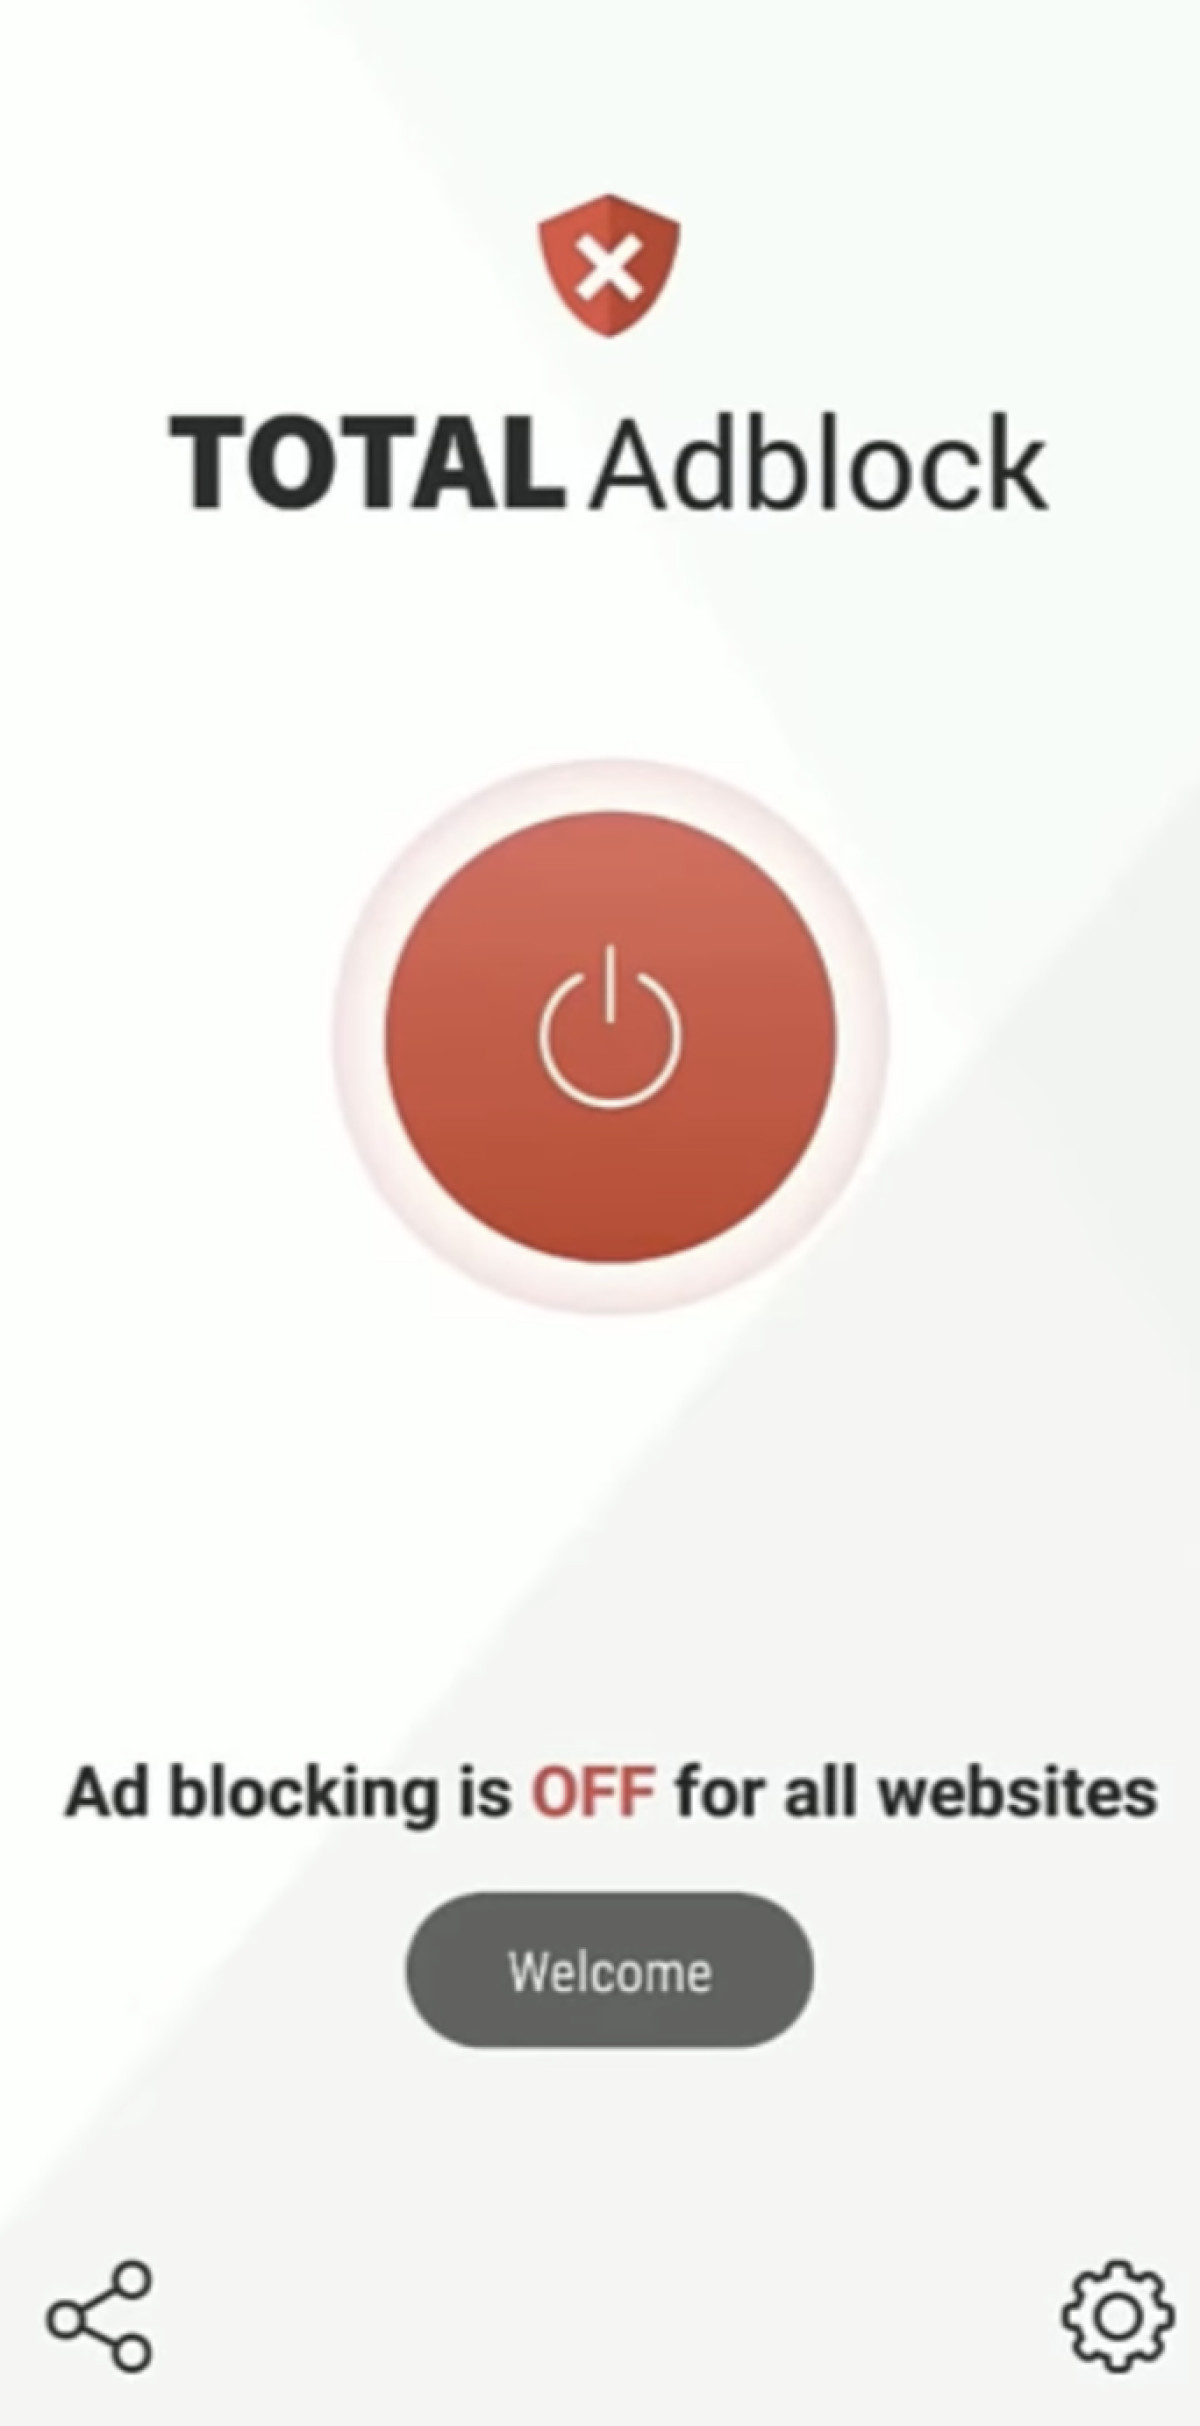 total adblock on android